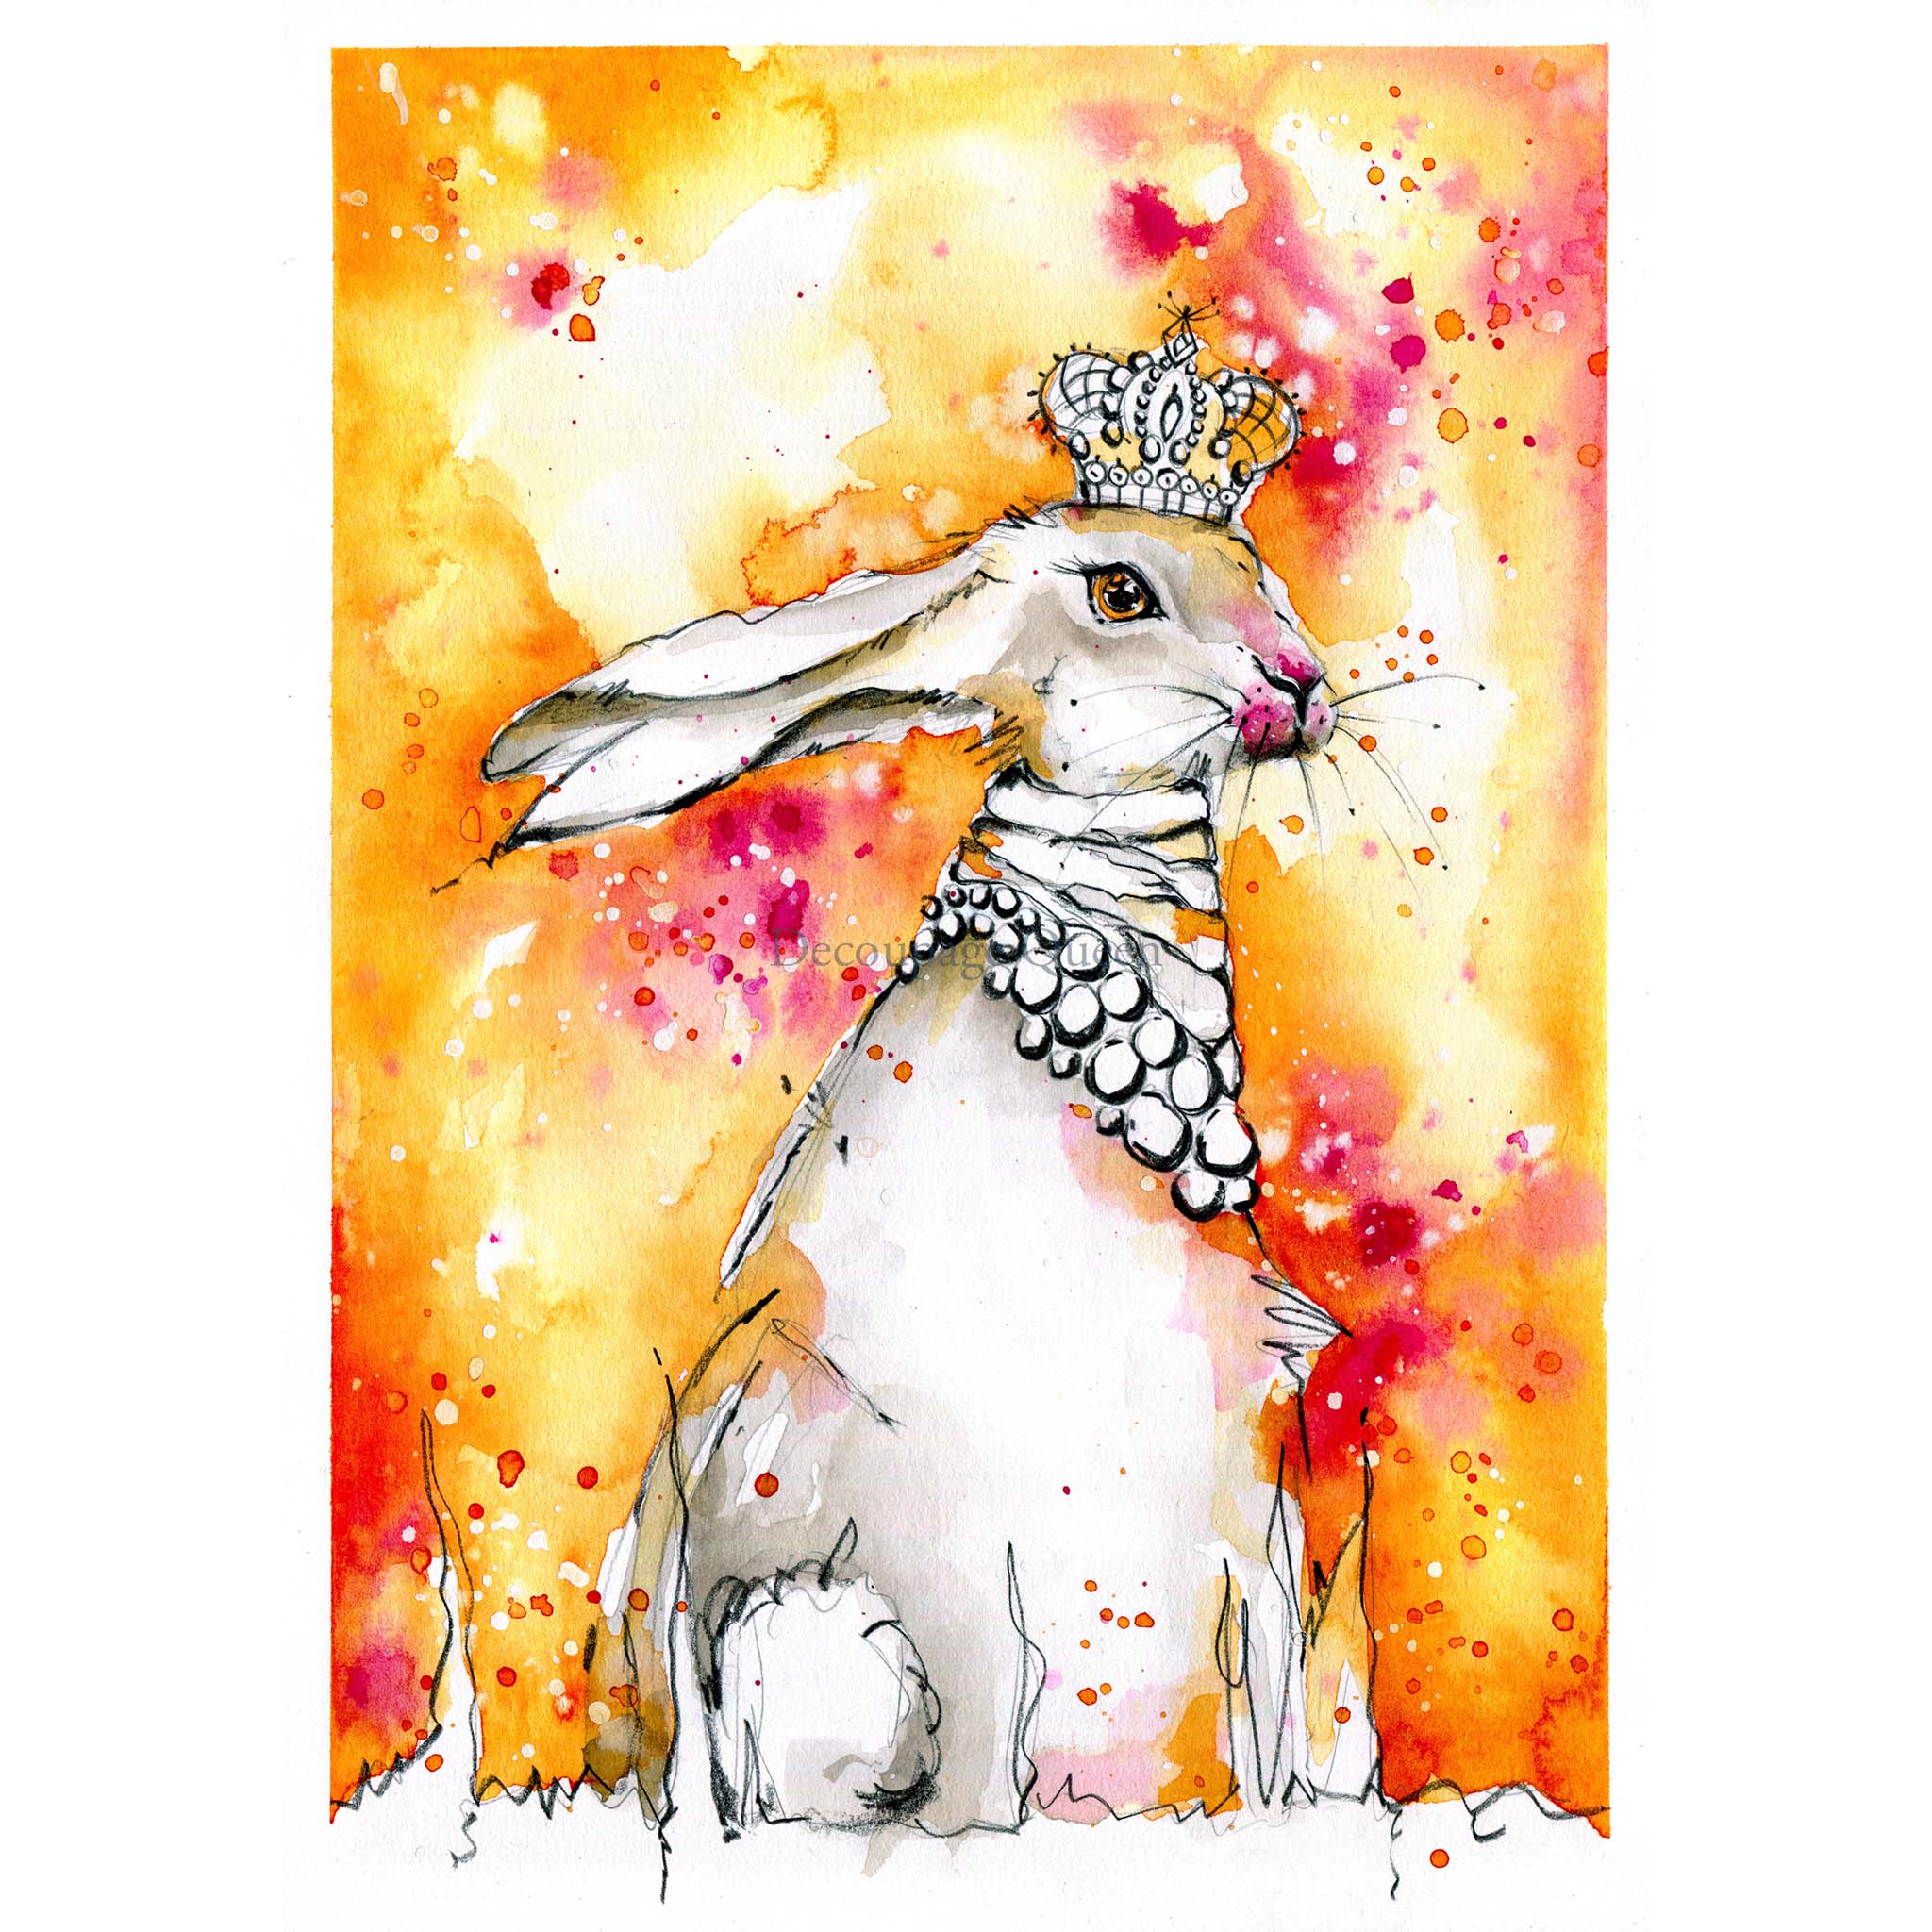 A3 rice paper design that features a vibrant orange watercolor background, accented with pops of red and a regal white rabbit wearing a crown and collar necklace is against a white background.